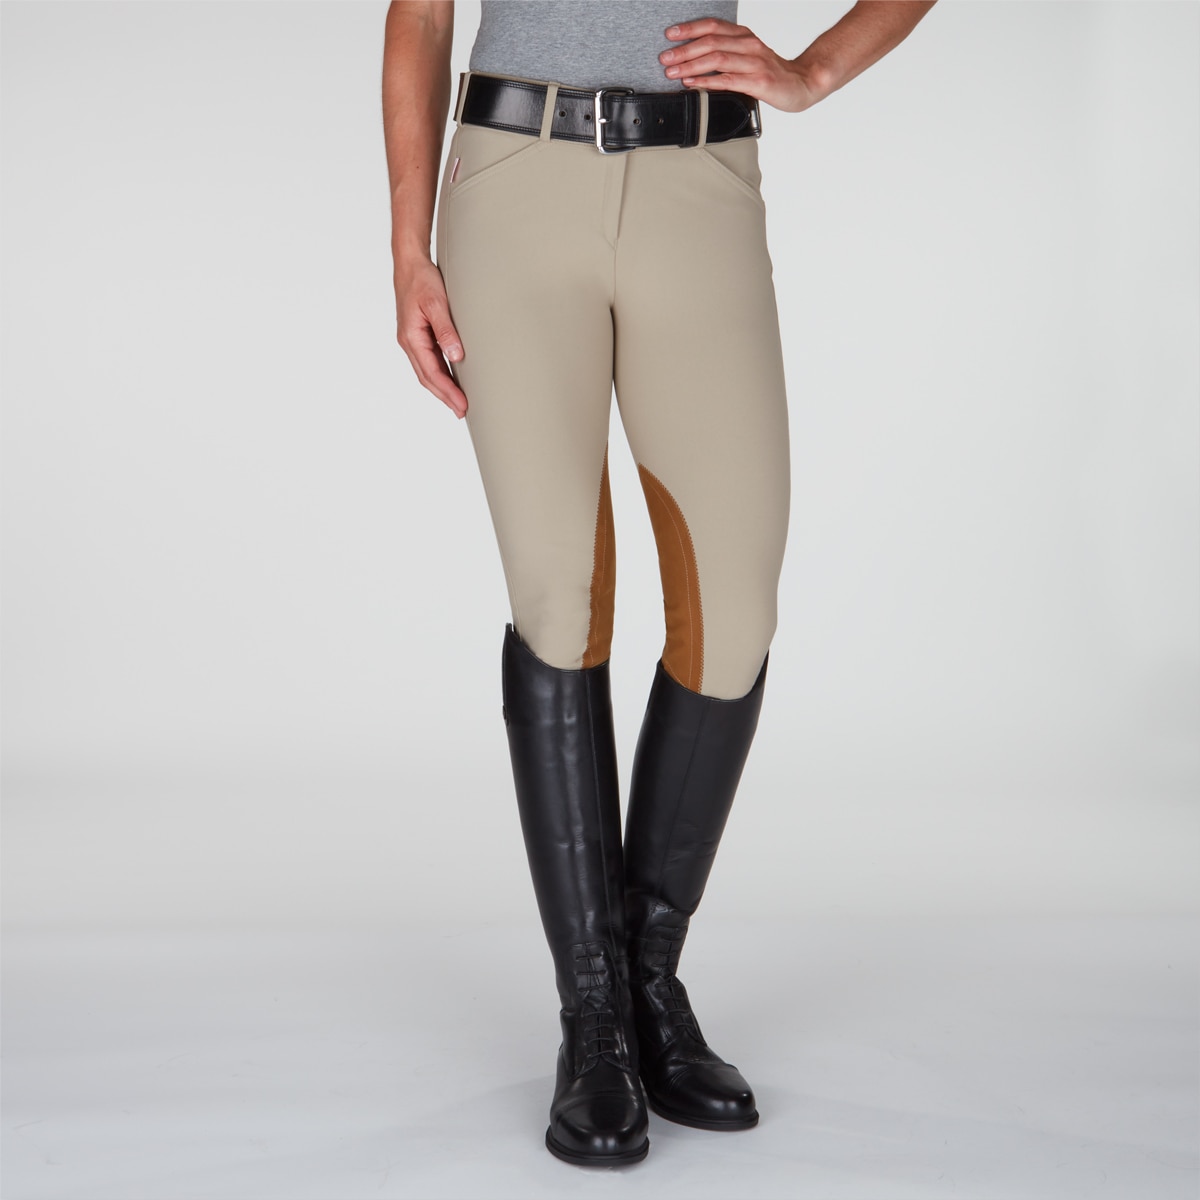 Charcoal, 16R Tailored Sportsman Girls Trophy Hunter Front Zip Breeches